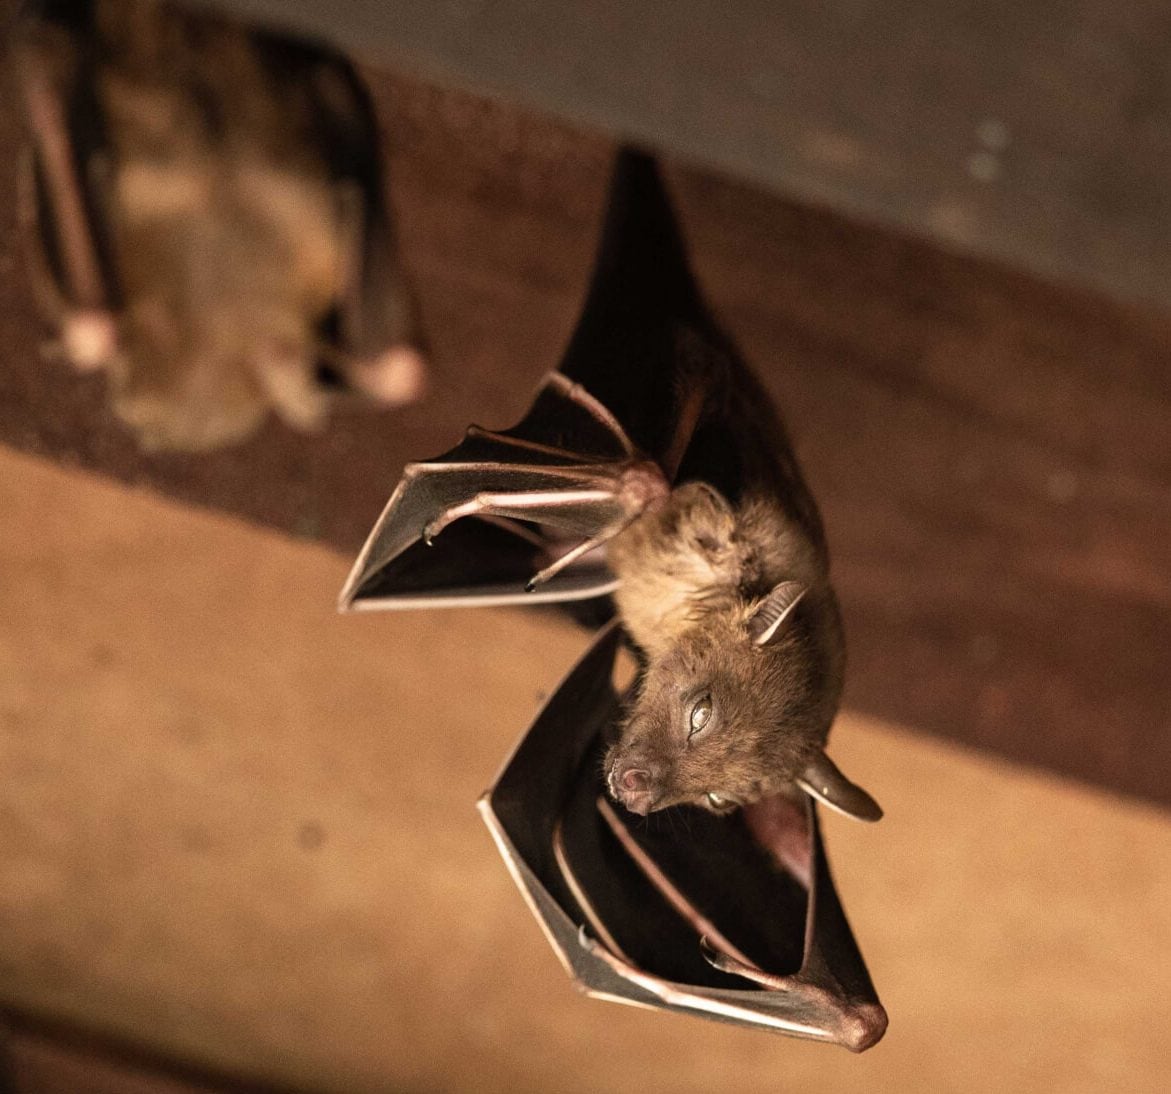 bat removal services from wildlife removal experts